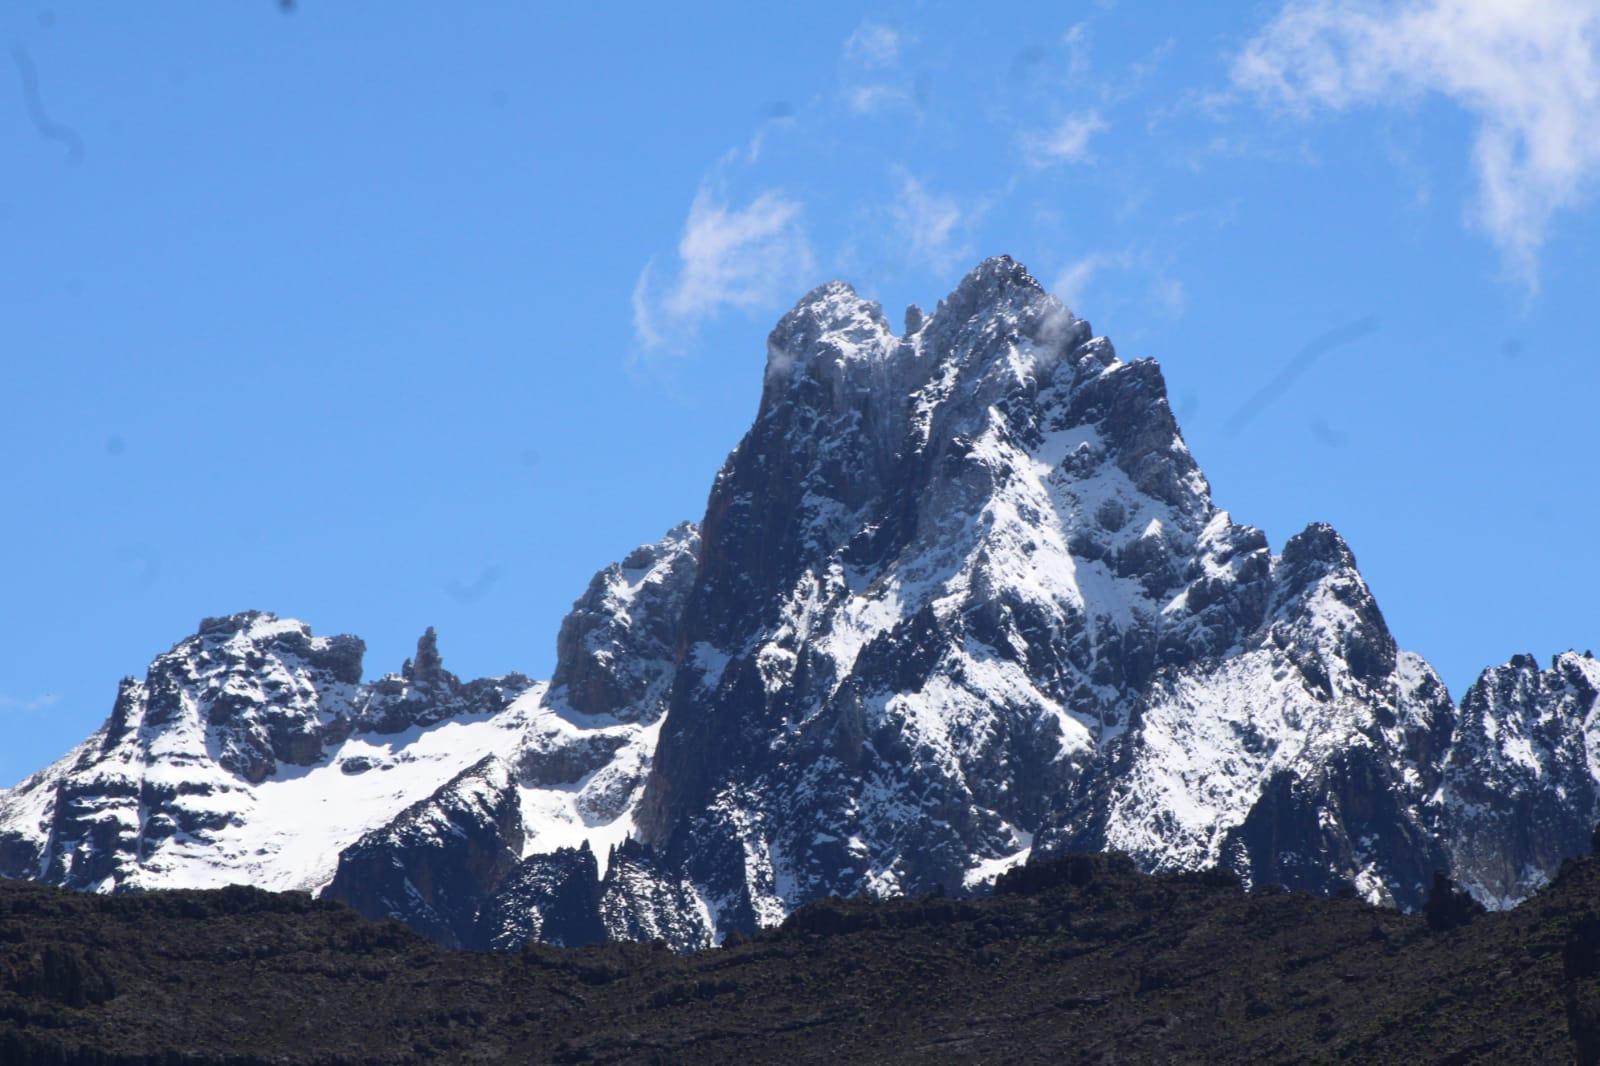 Must-See Cultural Events in Mount Kenya